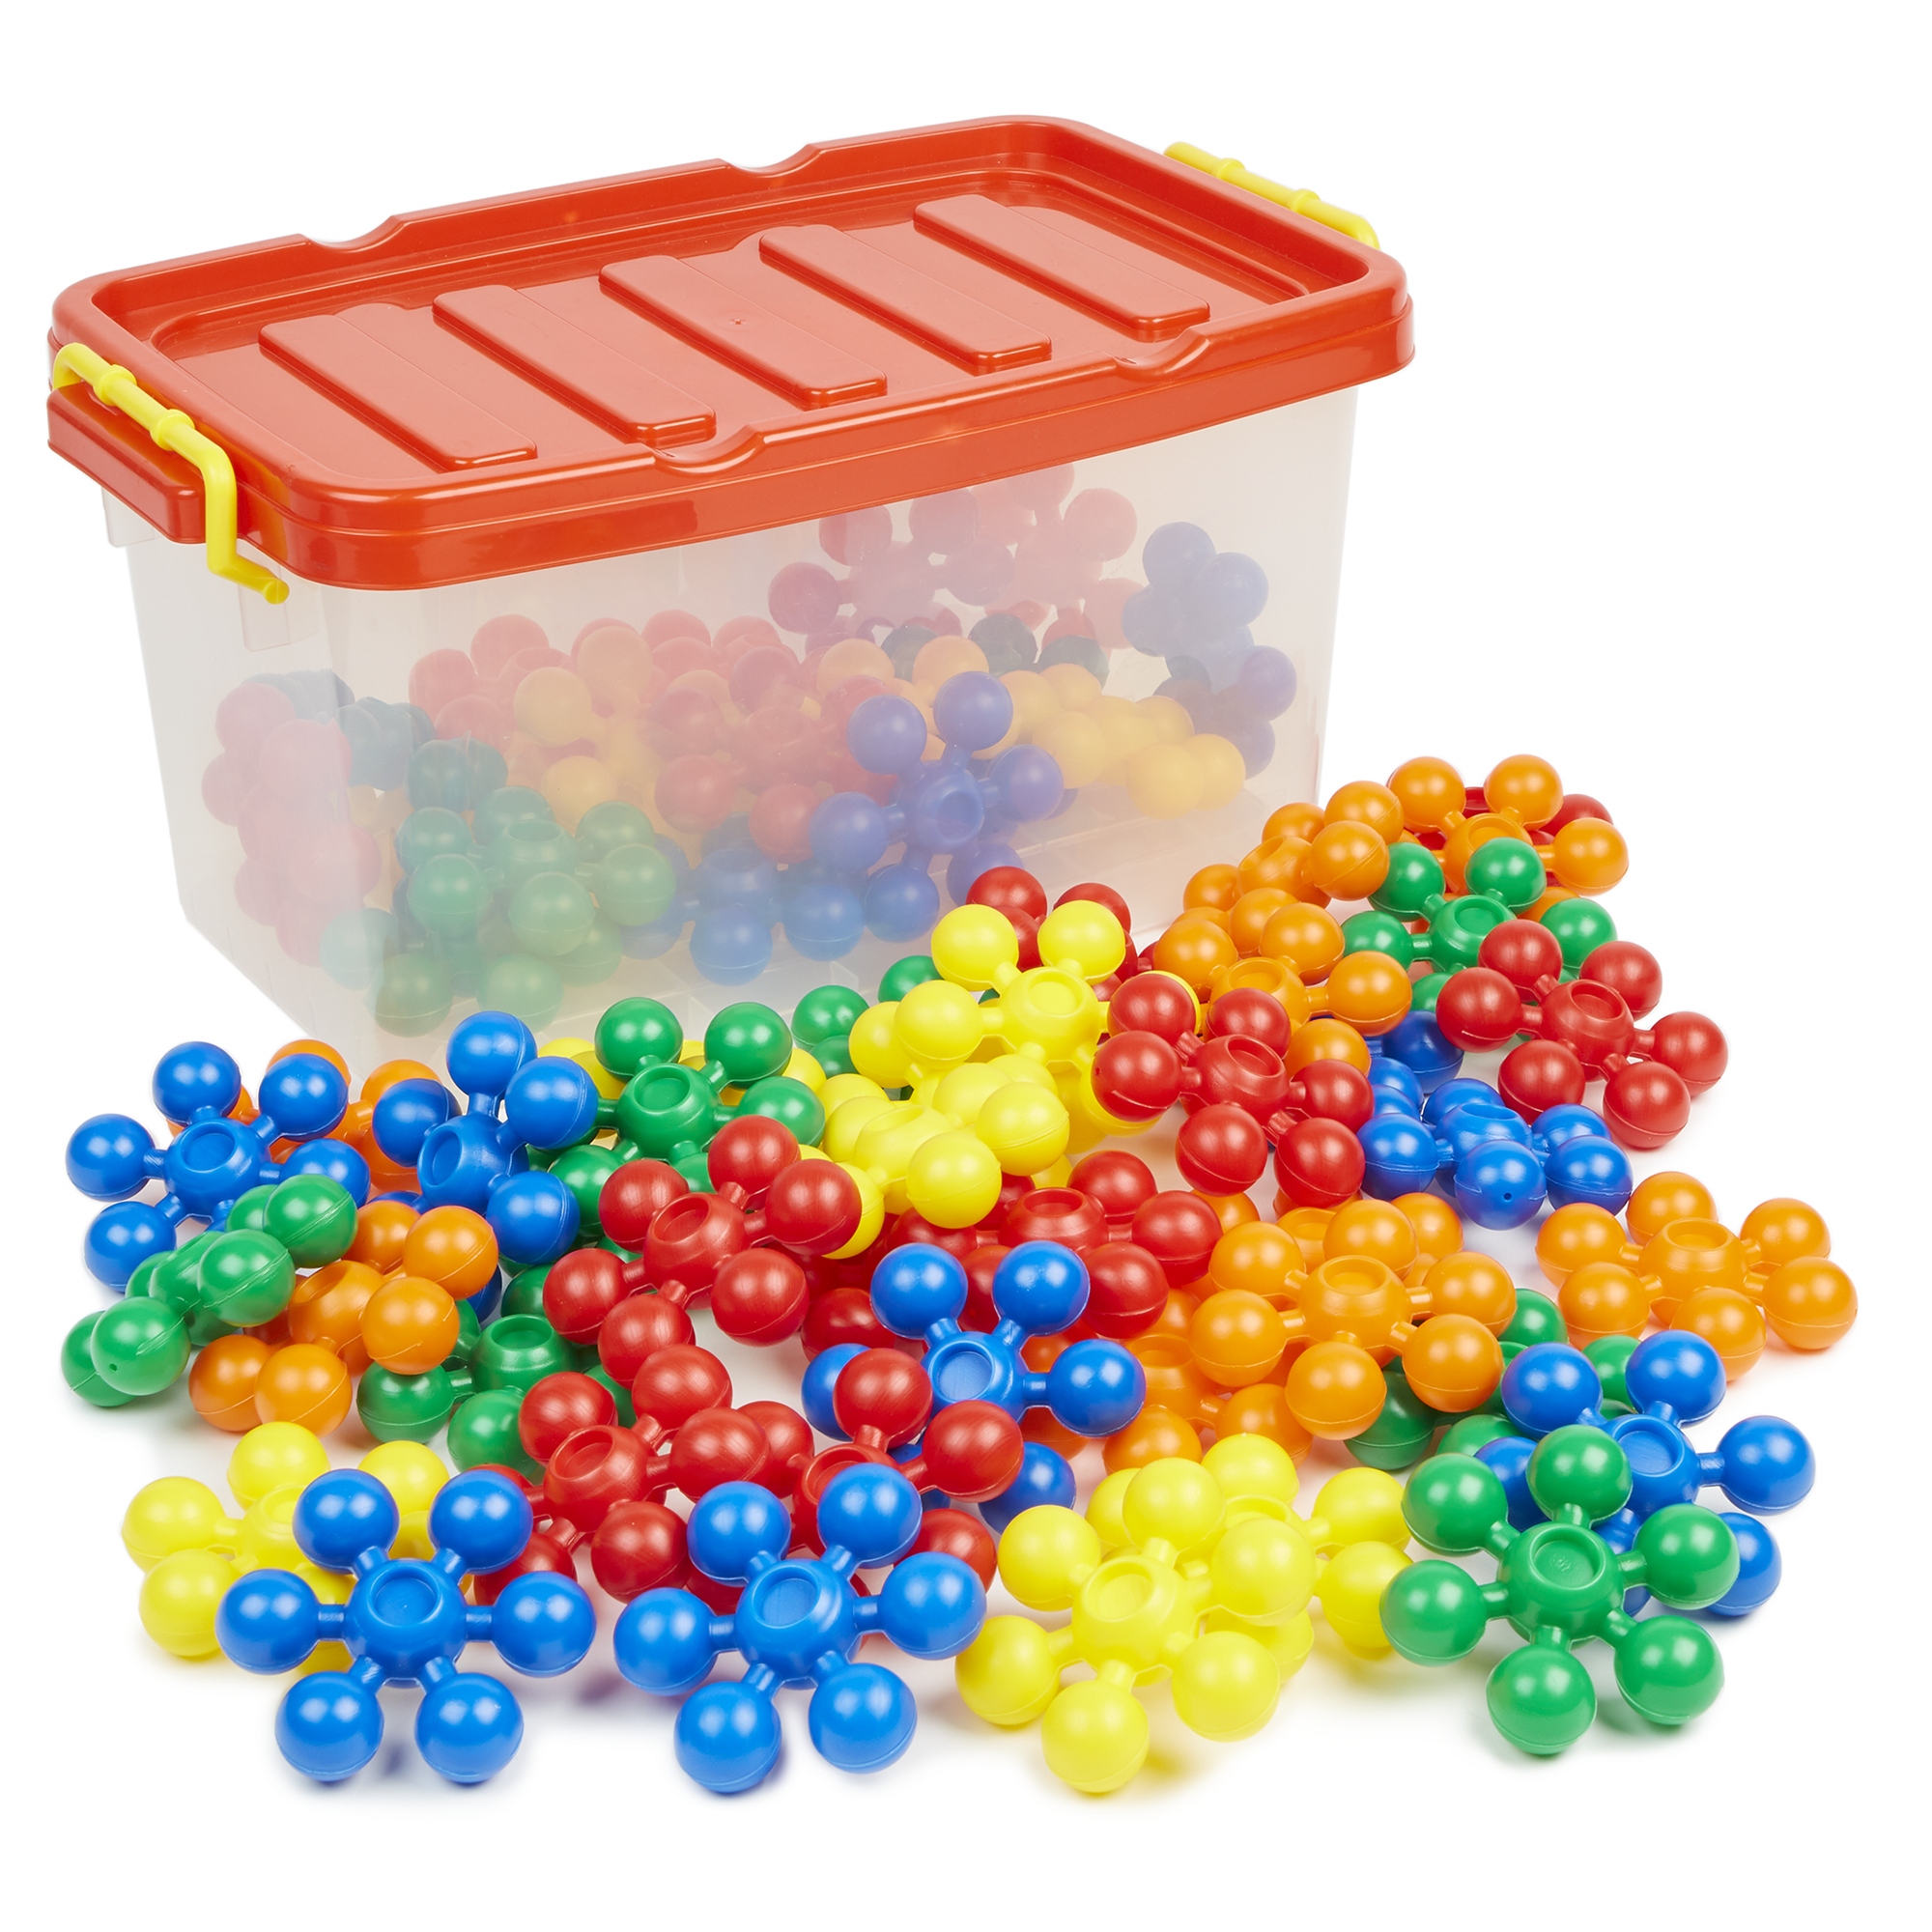 Star Connectors - 60pc Large Container